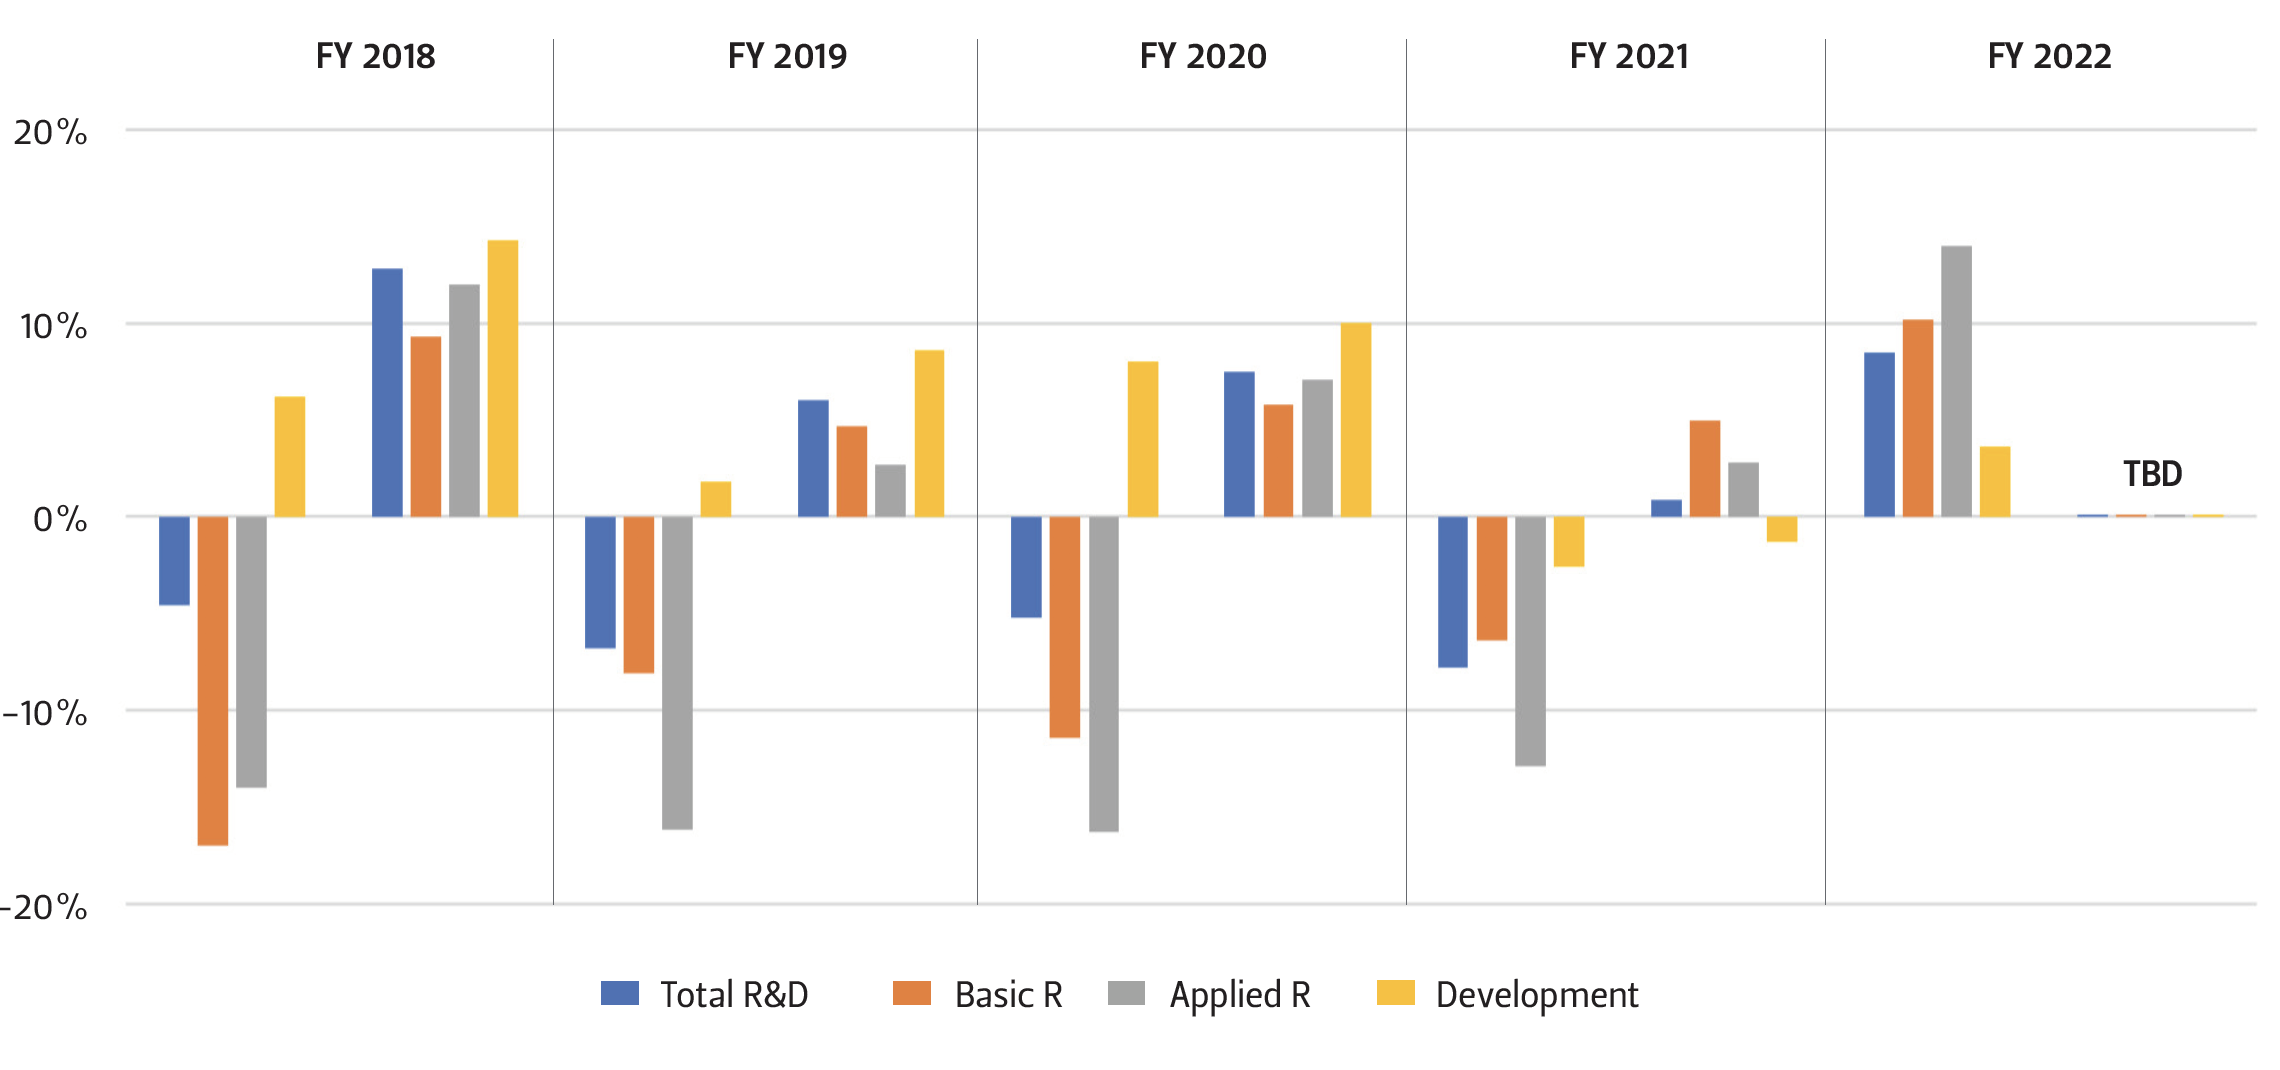 Change in R&D Budget Request an Appropriation from Previous Fiscal Year